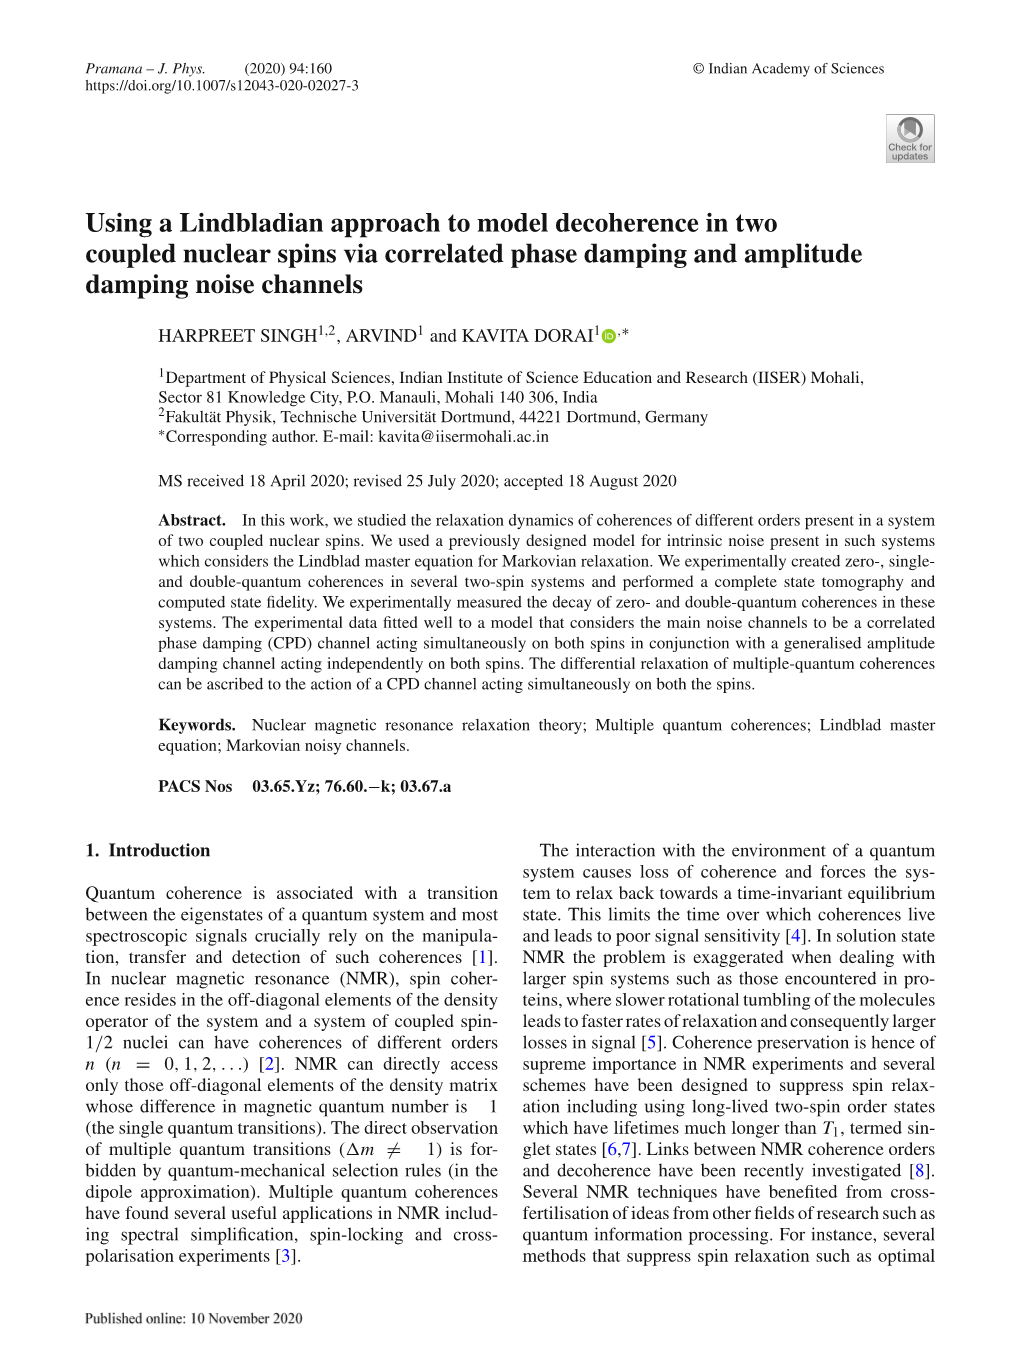 Using a Lindbladian Approach to Model Decoherence in Two Coupled Nuclear Spins Via Correlated Phase Damping and Amplitude Damping Noise Channels